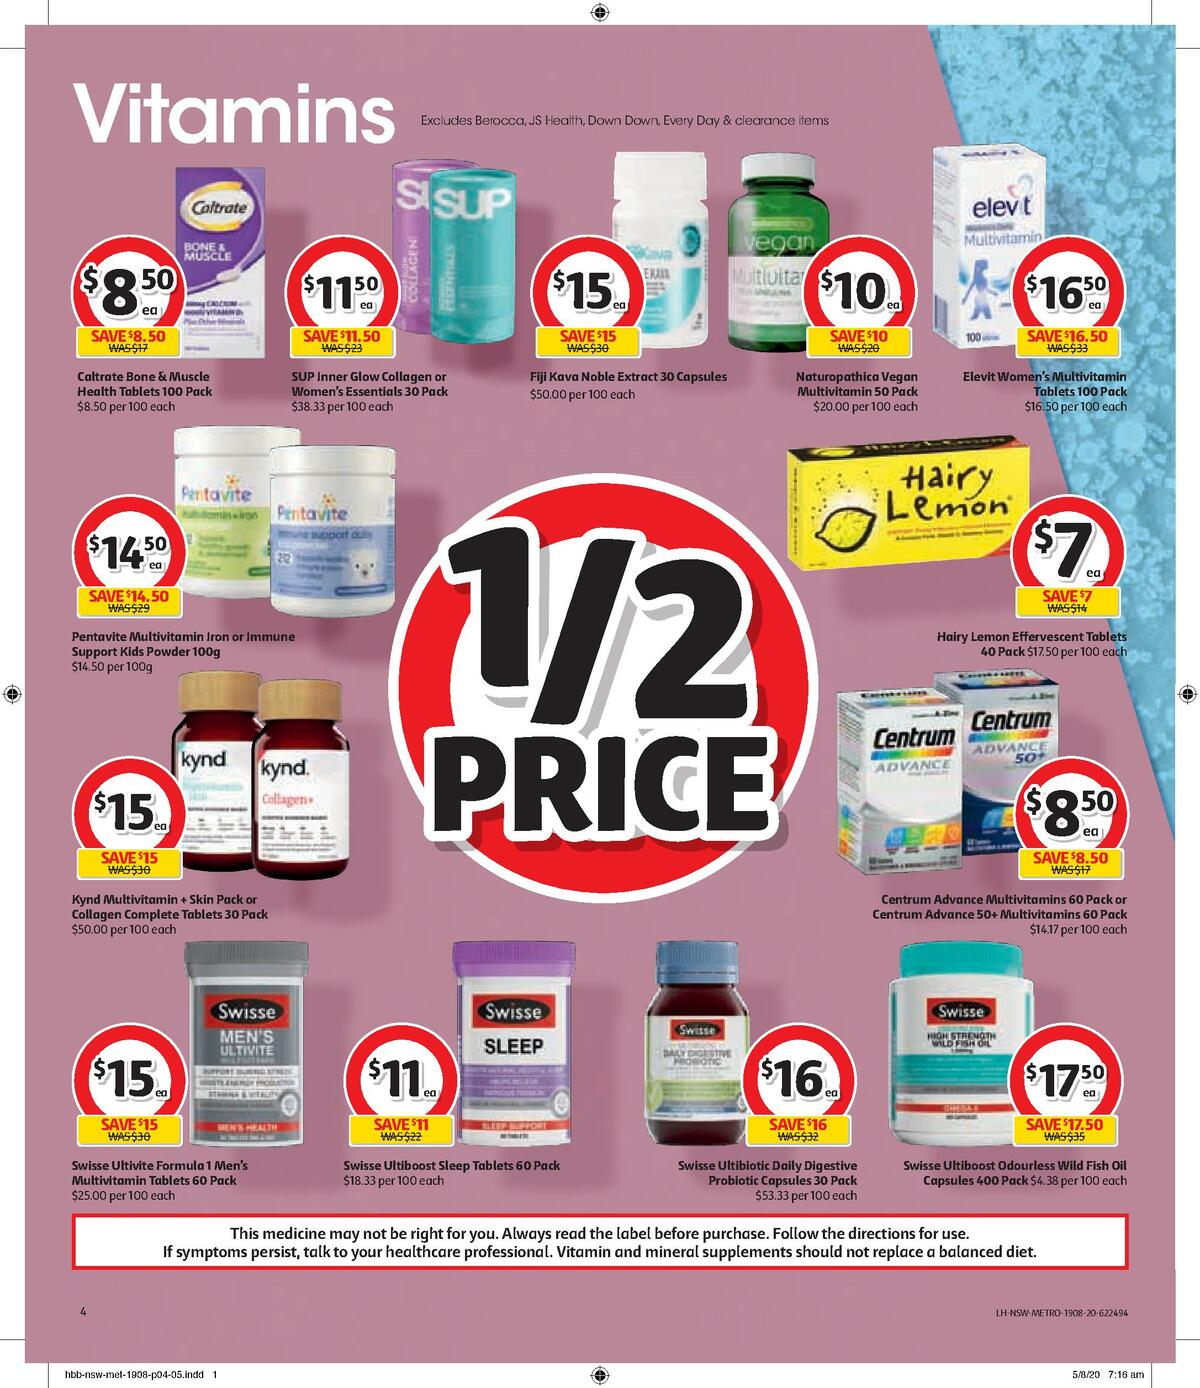 Coles Health & Beauty Catalogues from 19 August